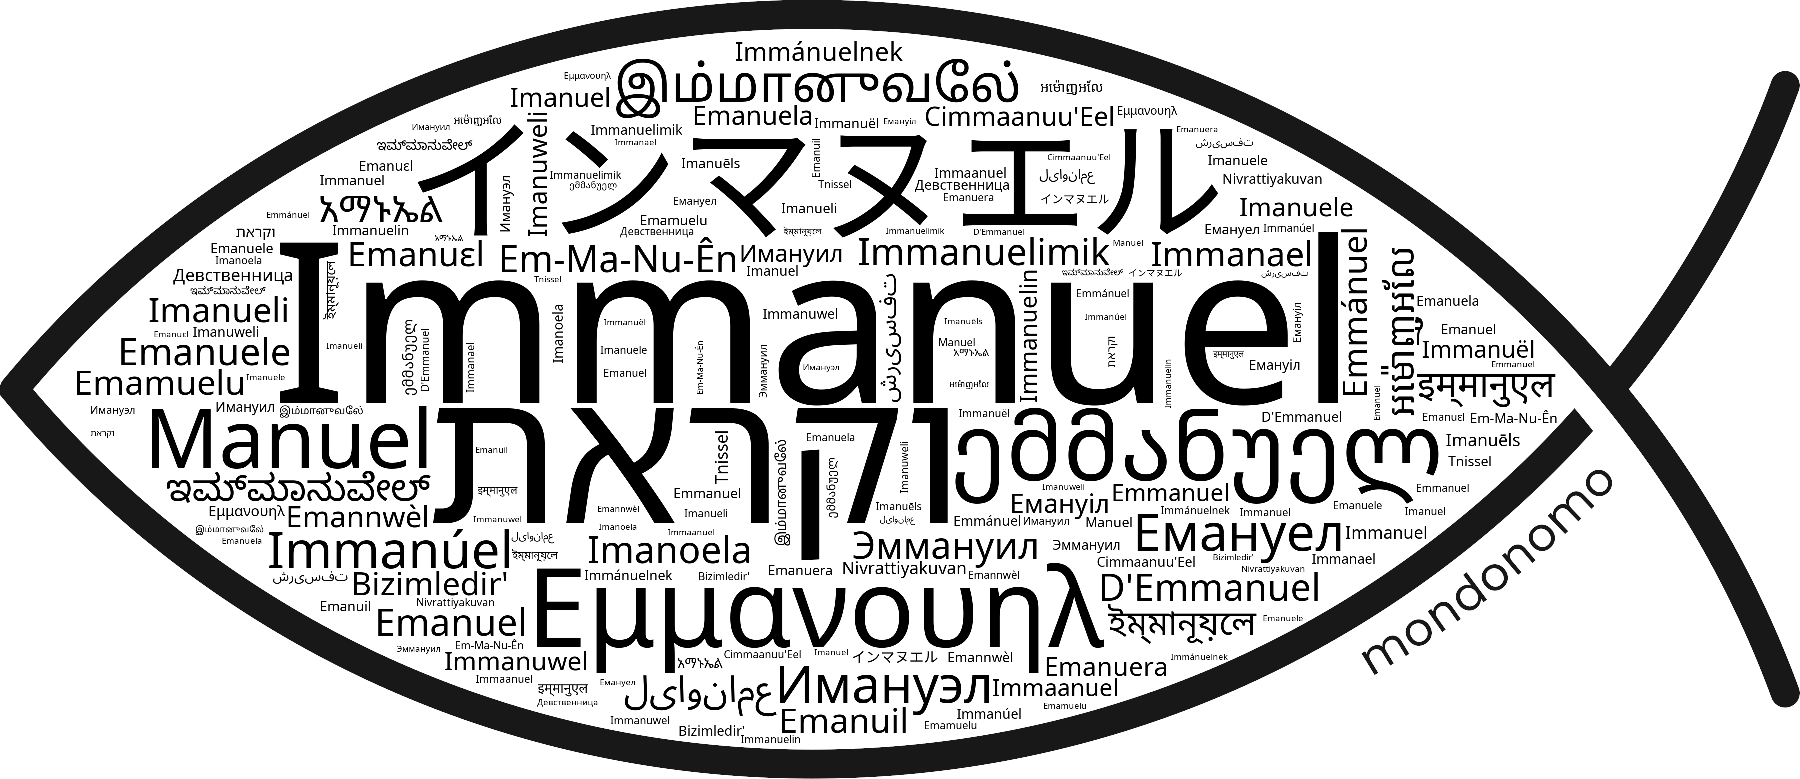 Name Immanuel in the world's Bibles